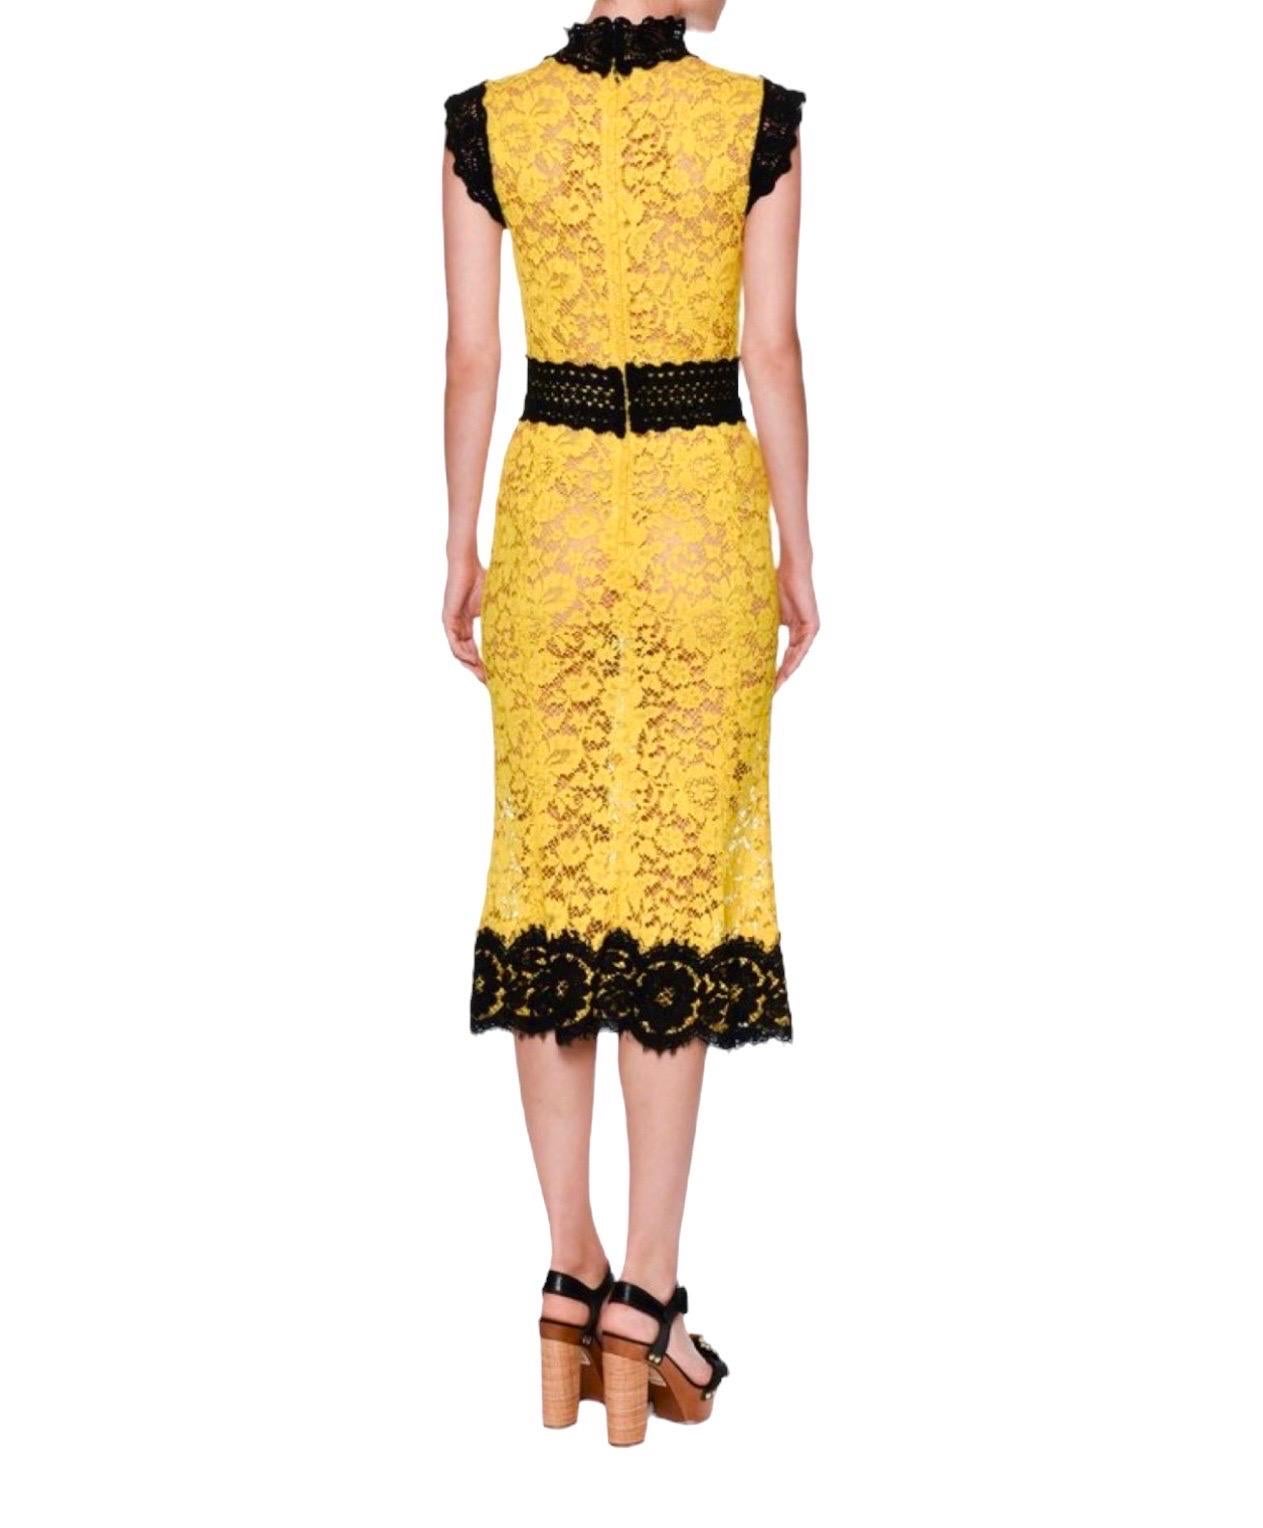 UNWORN Dolce & Gabbana Yellow & Black Guipure Lace Evening Cocktail Dress 40 For Sale 5